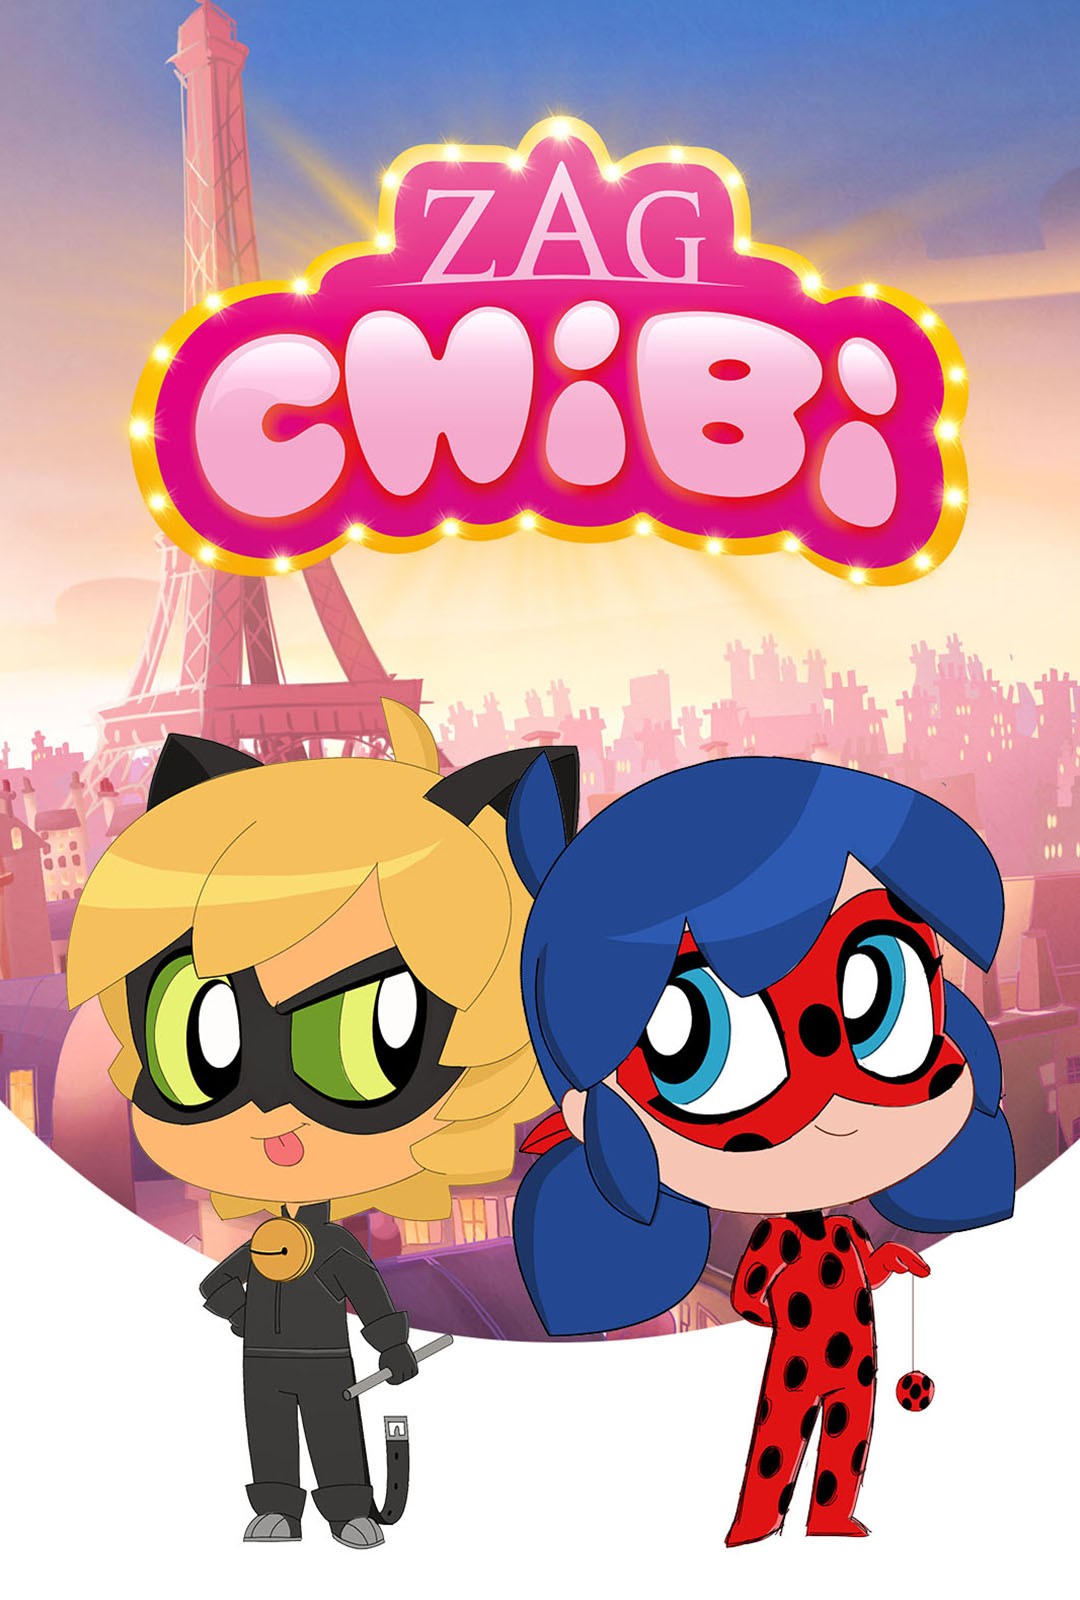 miraculous zag chibi wallpapers high quality download free on miraculous chibi wallpapers